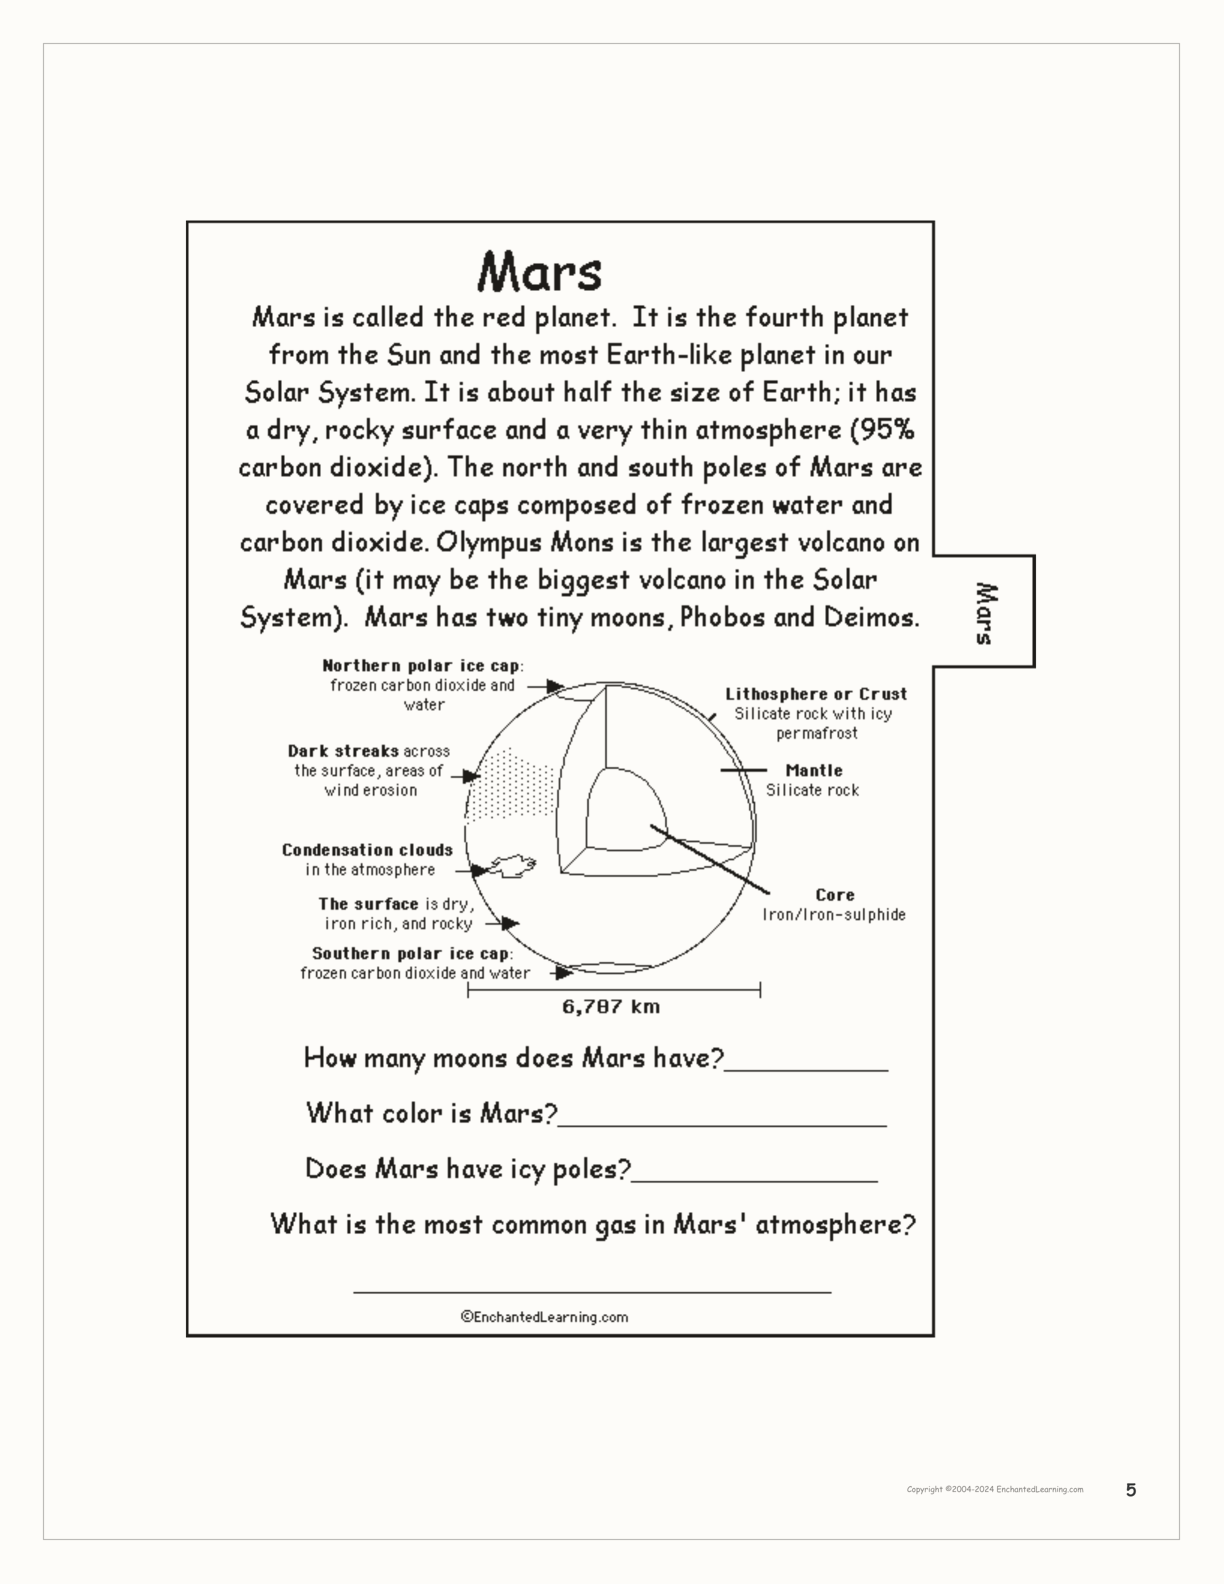 The Planets of our Solar System Book interactive printout page 5